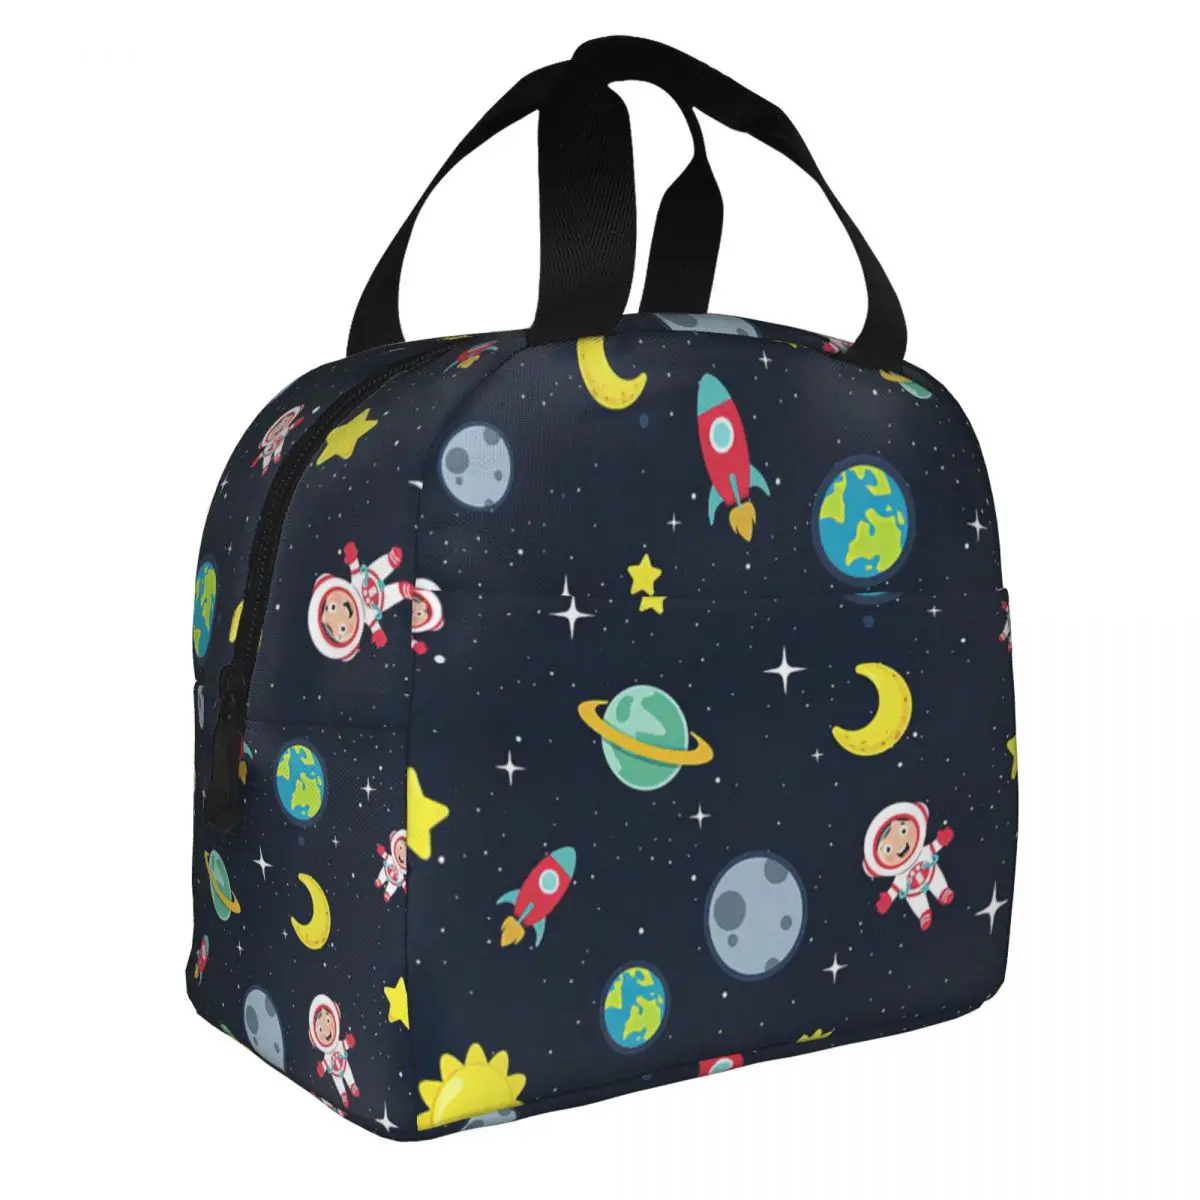 Starry Sky, Earth, Astronaut Lunch Bento Bags Portable Aluminum Foil thickened Thermal Cloth Lunch Bag for Women Men Boy